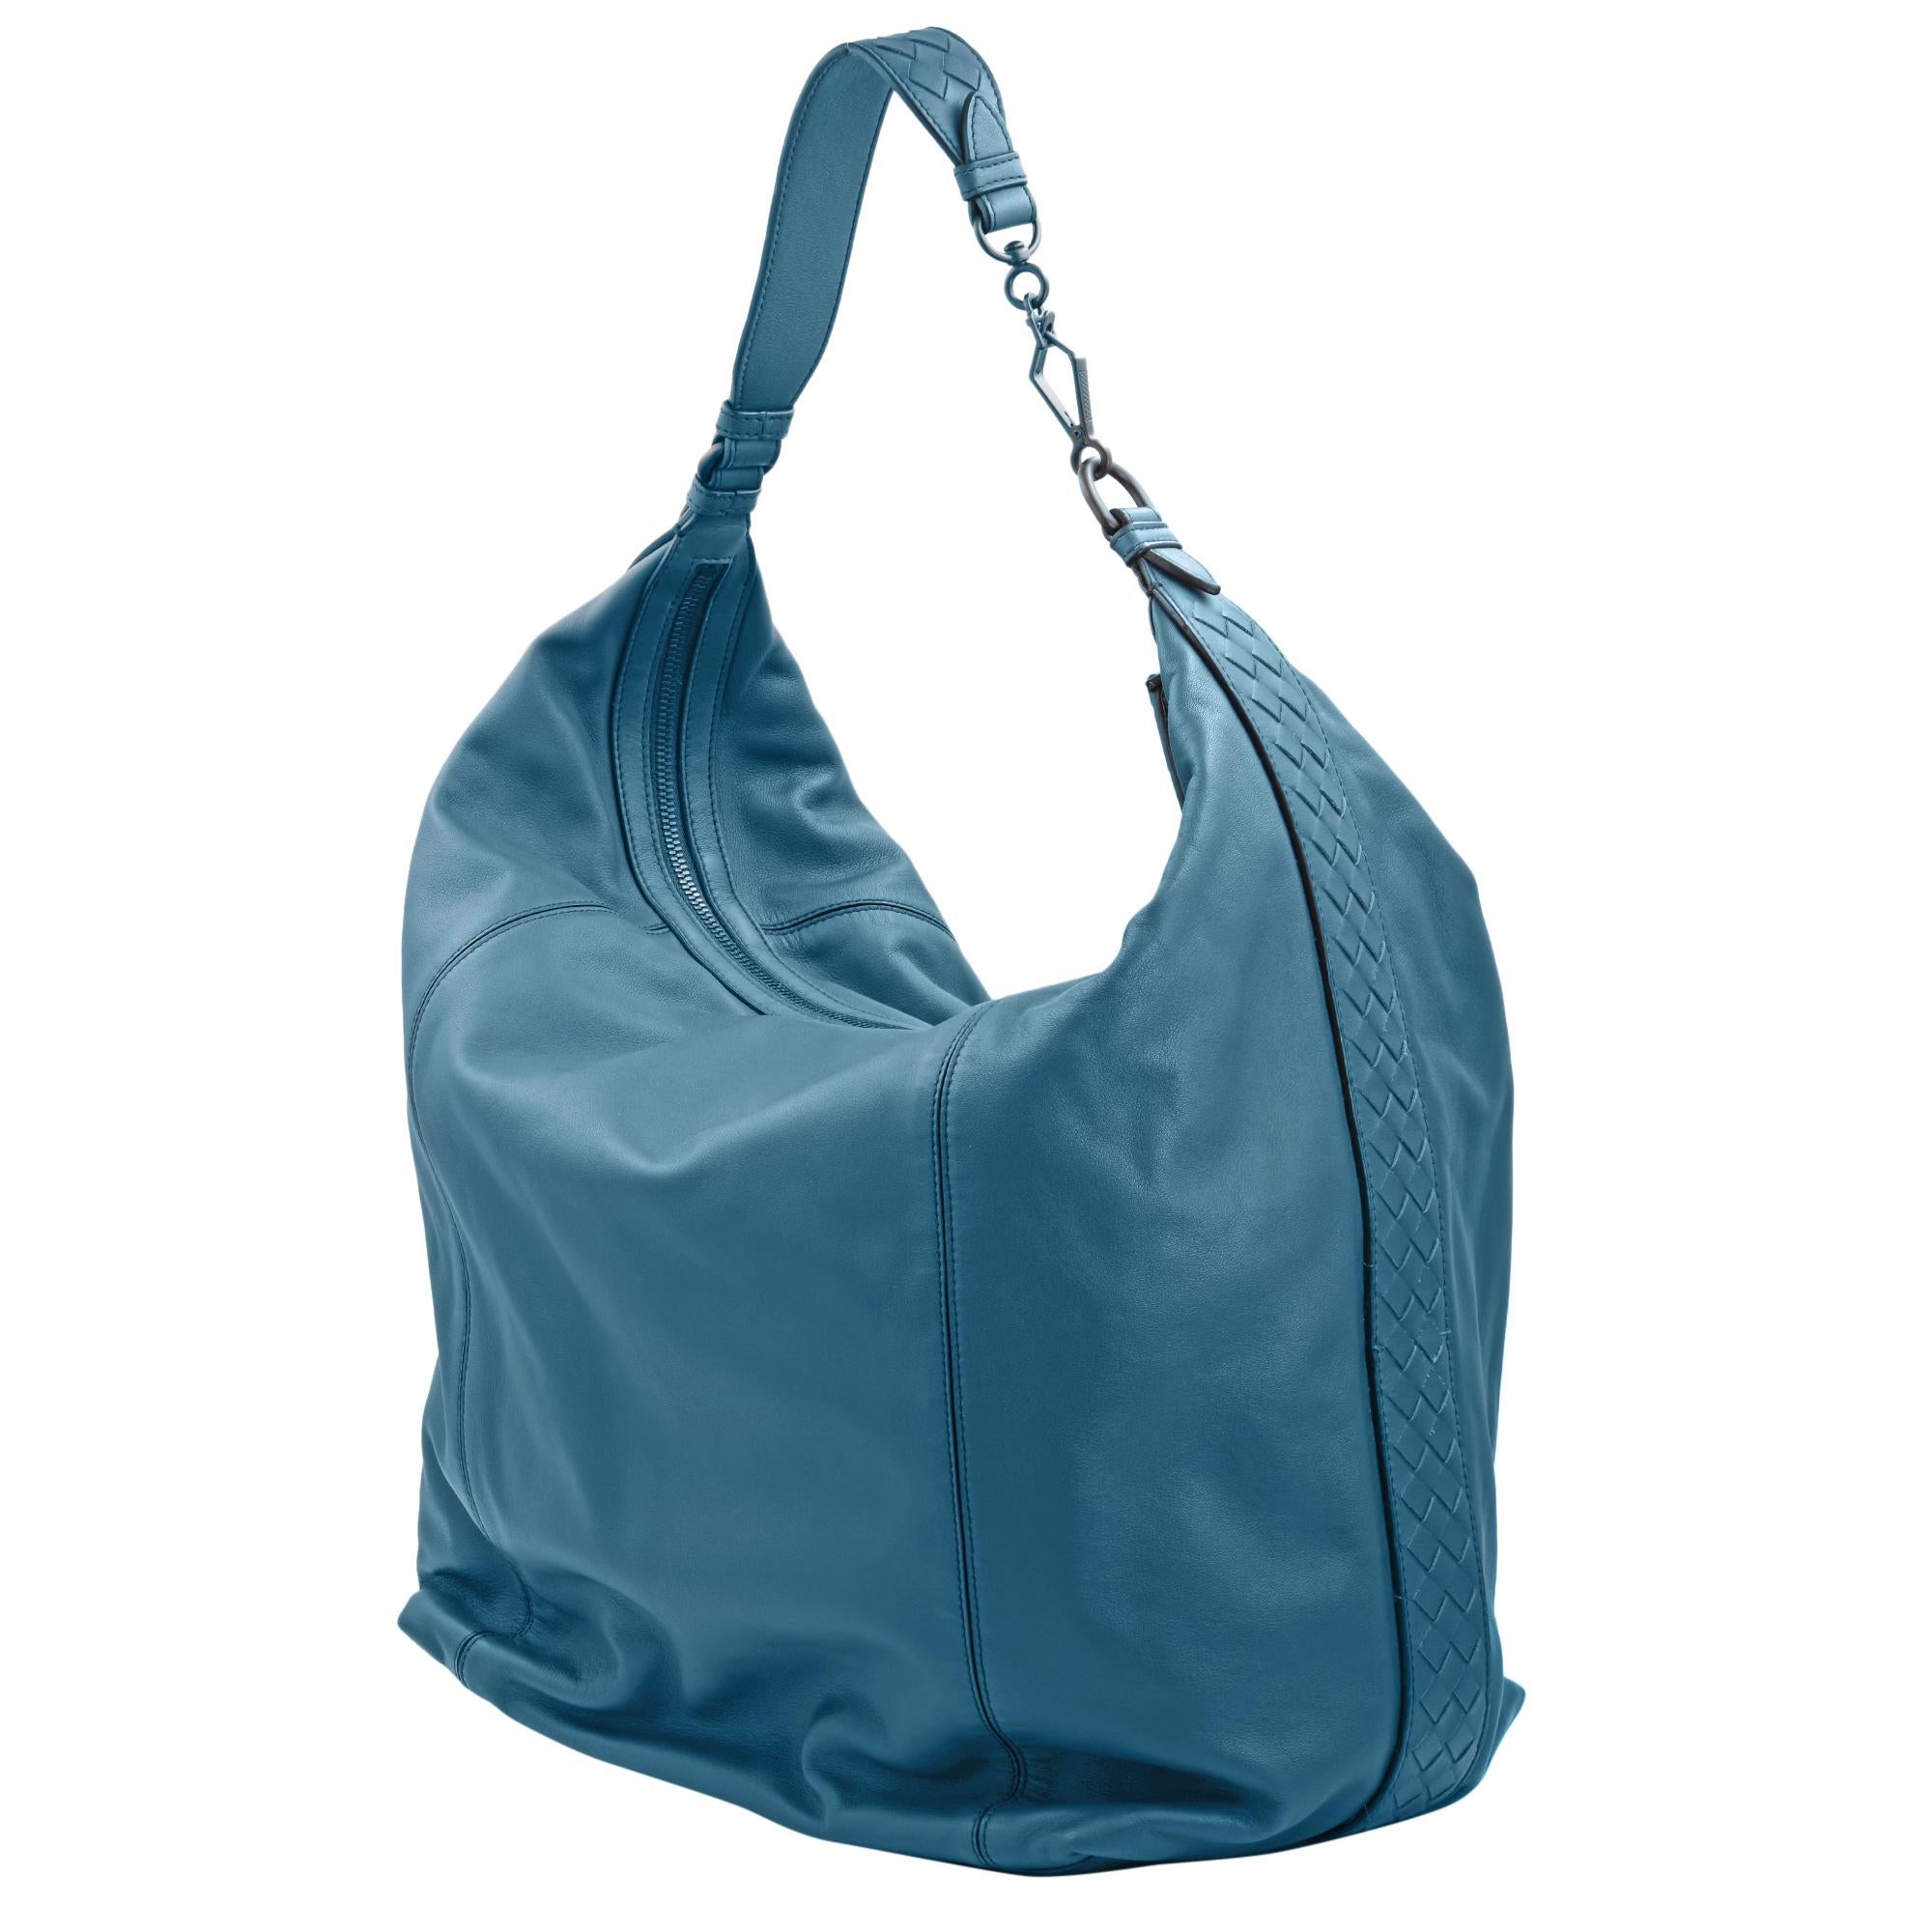 Bottega Veneta blue hobo bag updated with signature Intrecciato detailing on the sides and shoulder strap. Features top zip closure, gunmetal tone hardware, one inside zip pocket, two inside slip pockets and suede lining. Made in Italy.